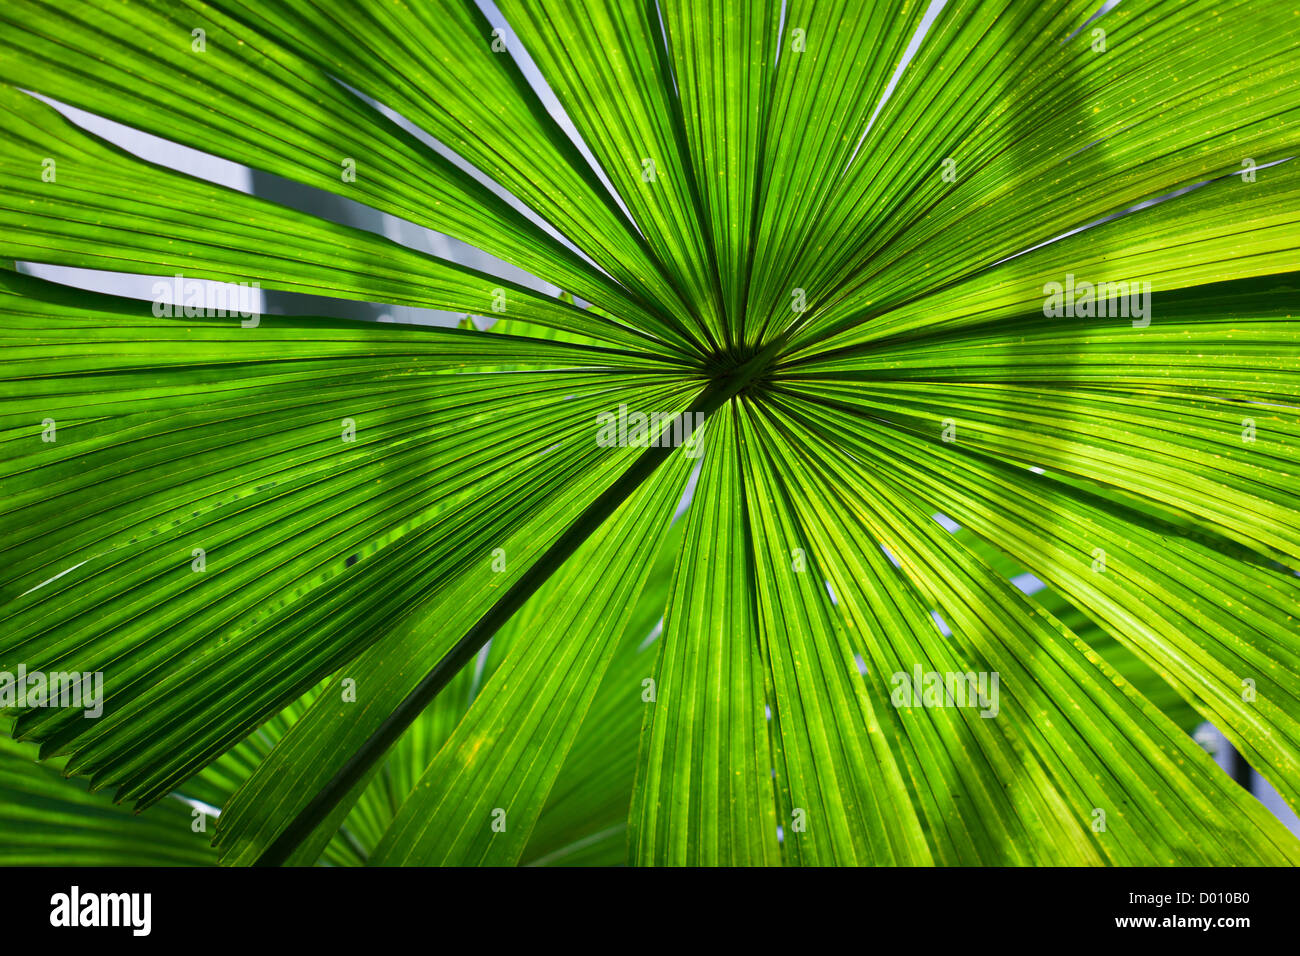 Beautiful vibrant, lush green fan palm frond or leaf Stock Photo